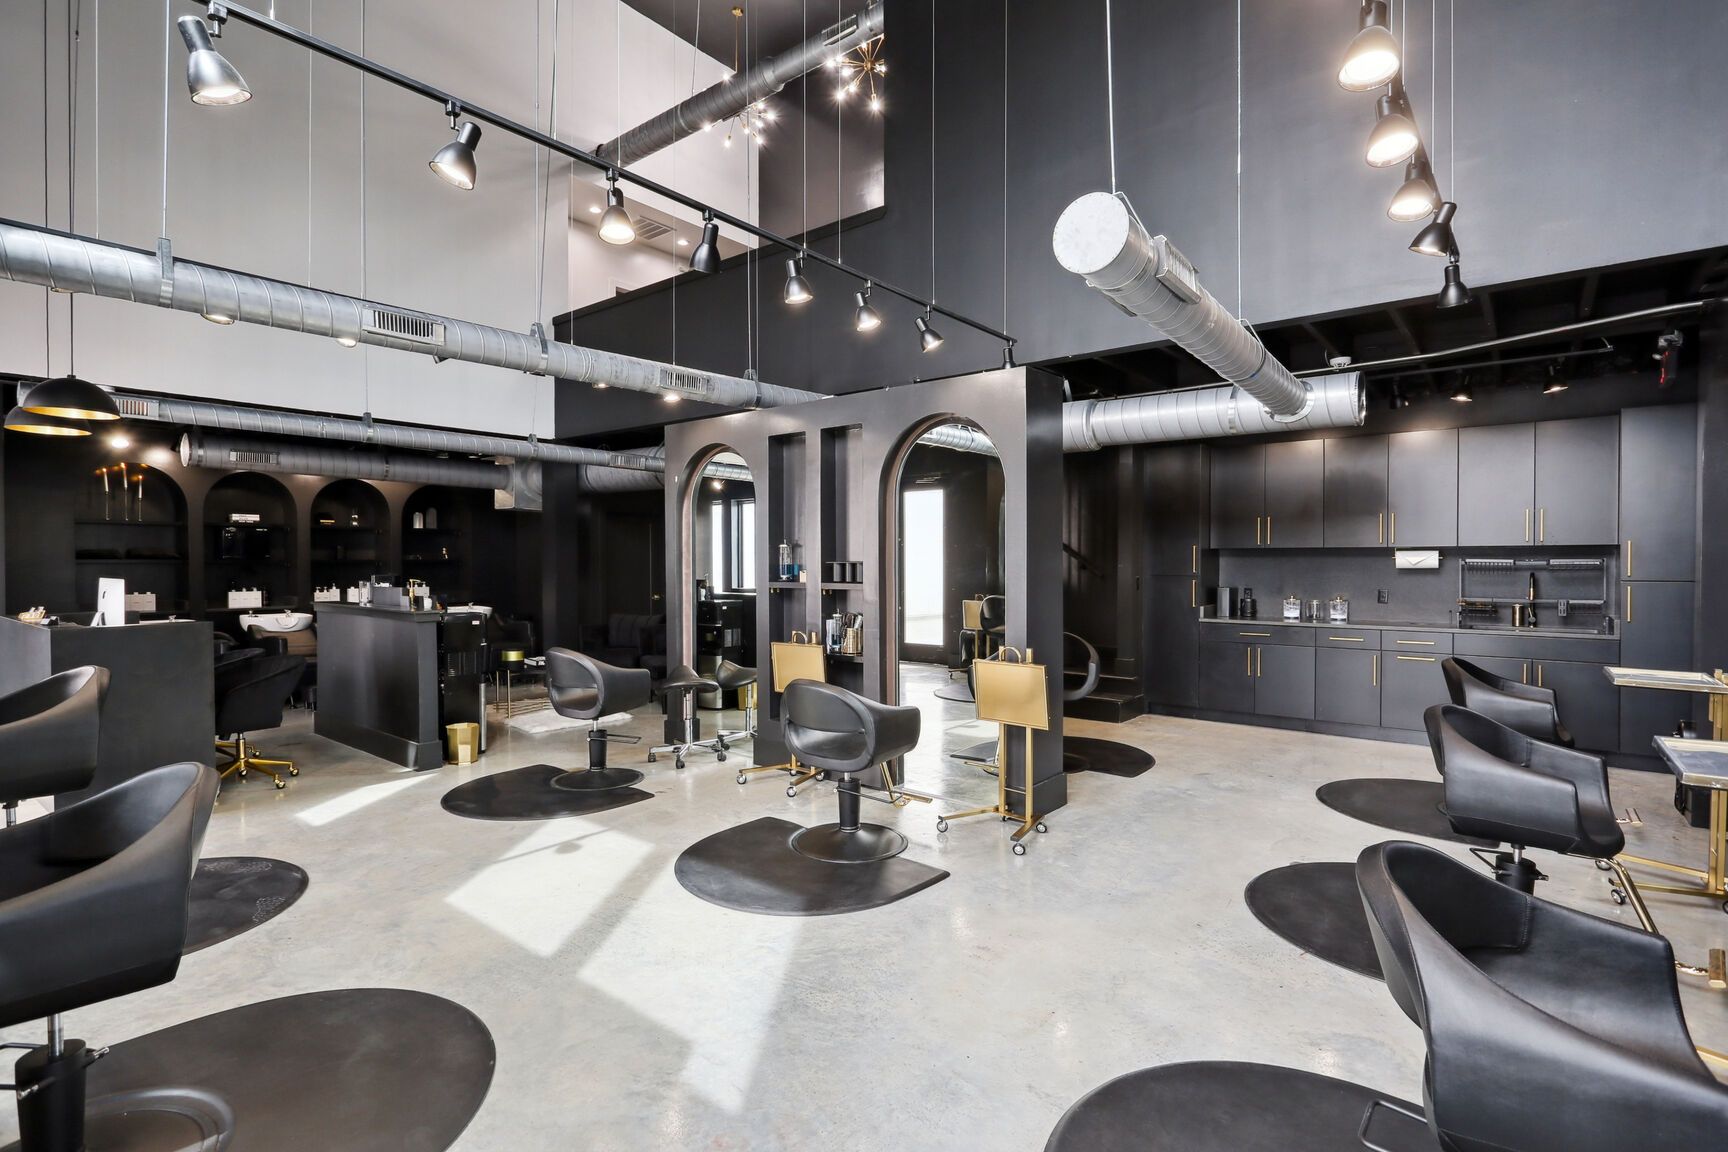 Salon KP interior designed and built by DMG's commercial construction division